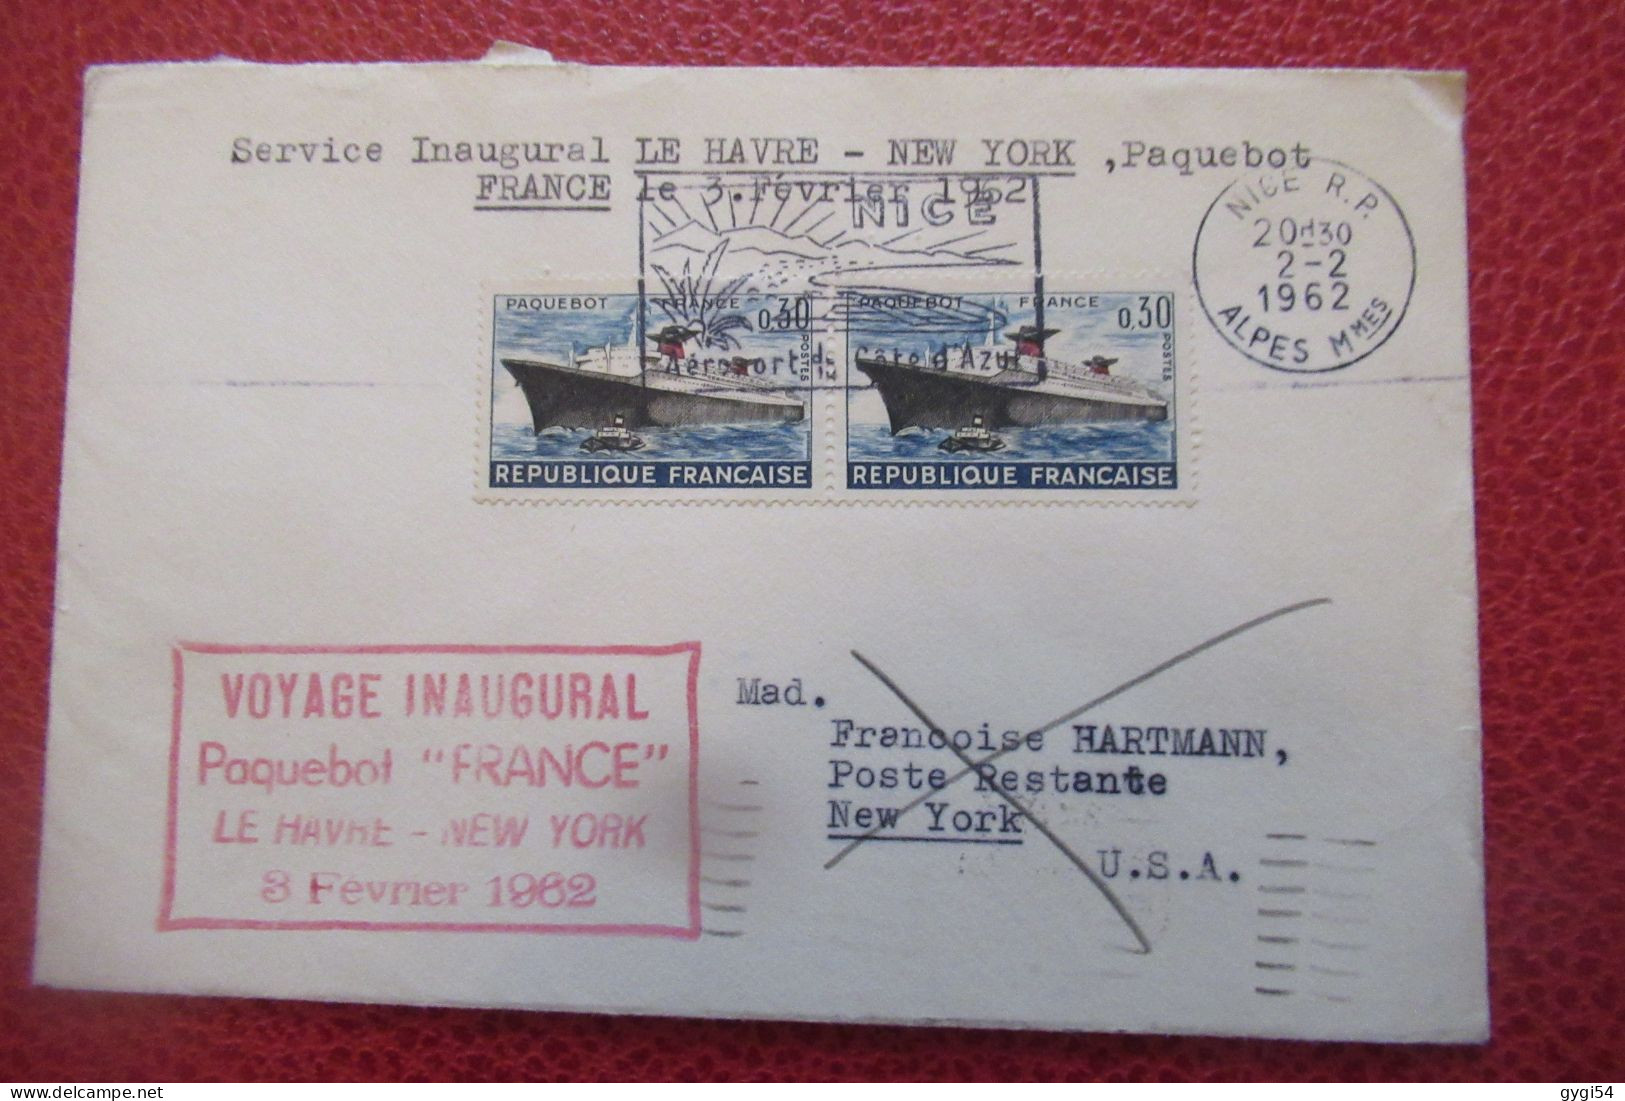 VOYAGE  INAUGURAL  Paquebot FRANCE  LE HAVRE - NEW - YORK  08 02 1962 - Lettres & Documents